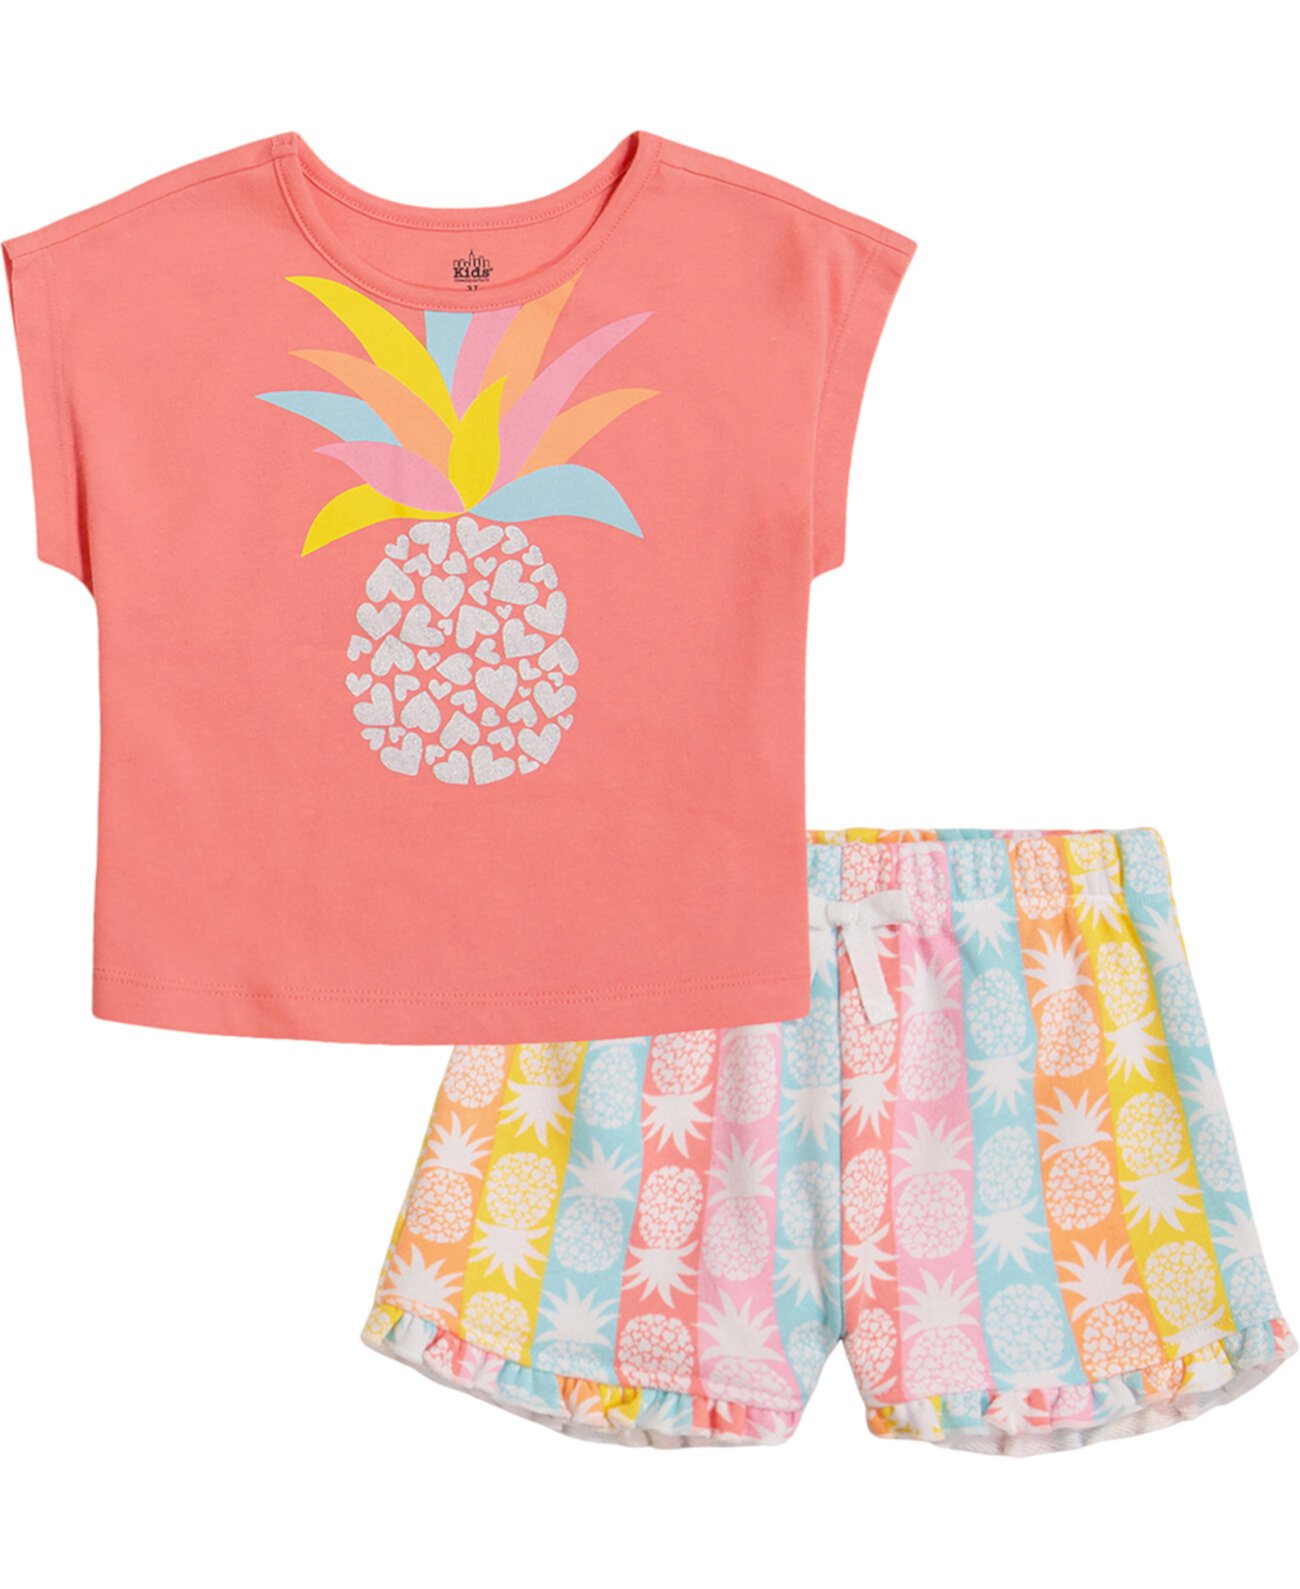 Toddler Girls Pineapple Tee and Printed French Terry Shorts, 2 piece set Kids Headquarters